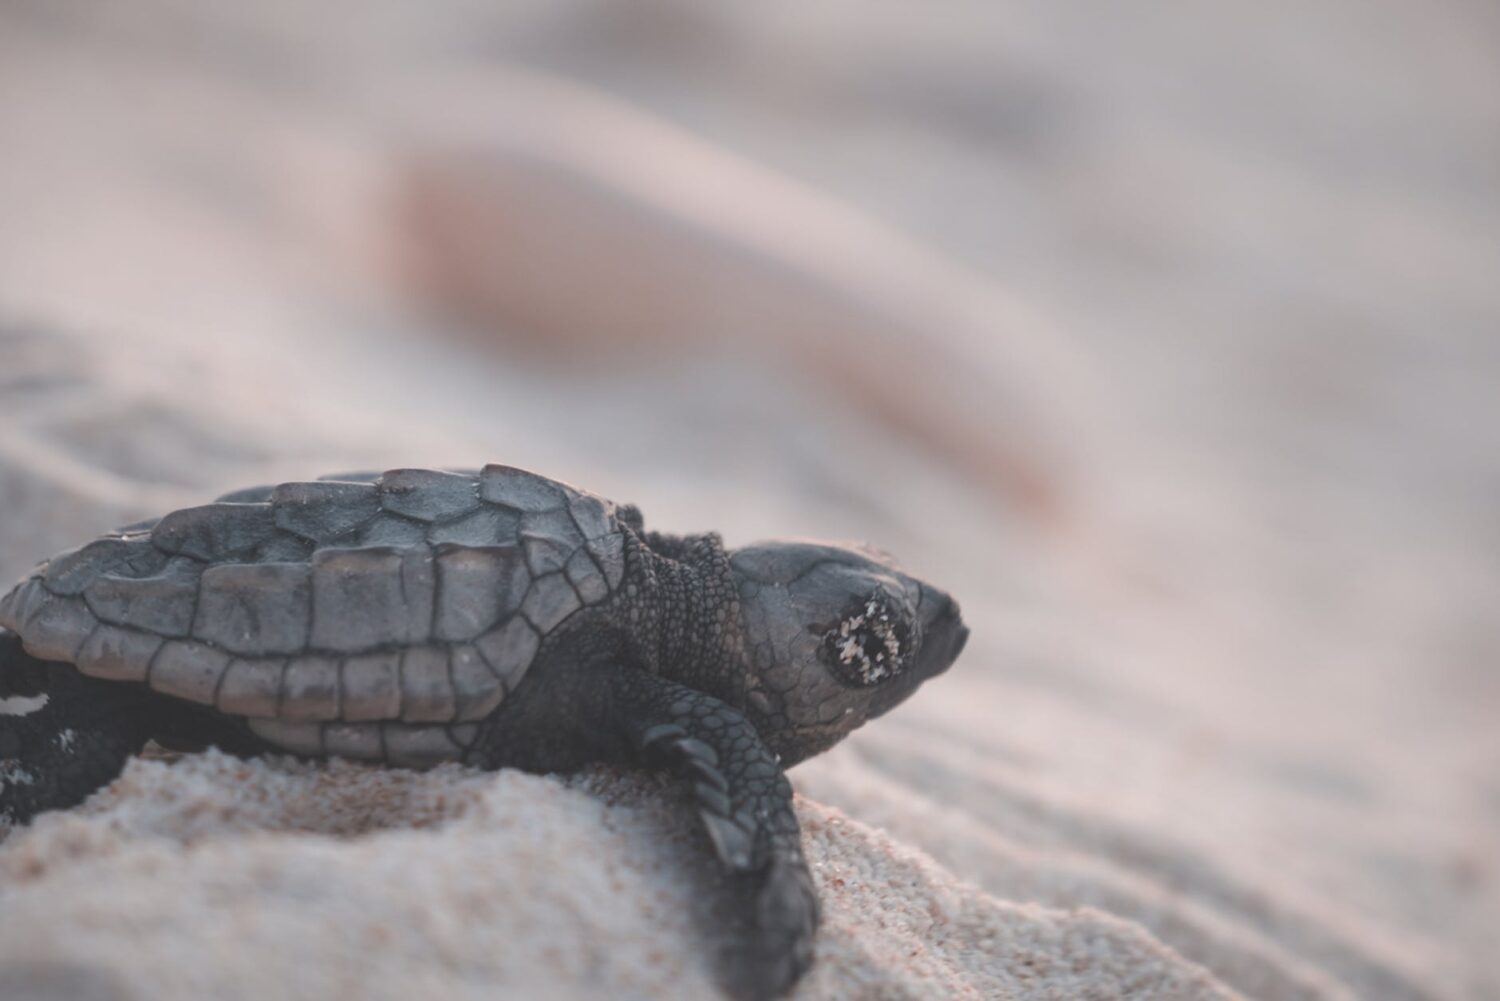 turtle on sandy beach in nature